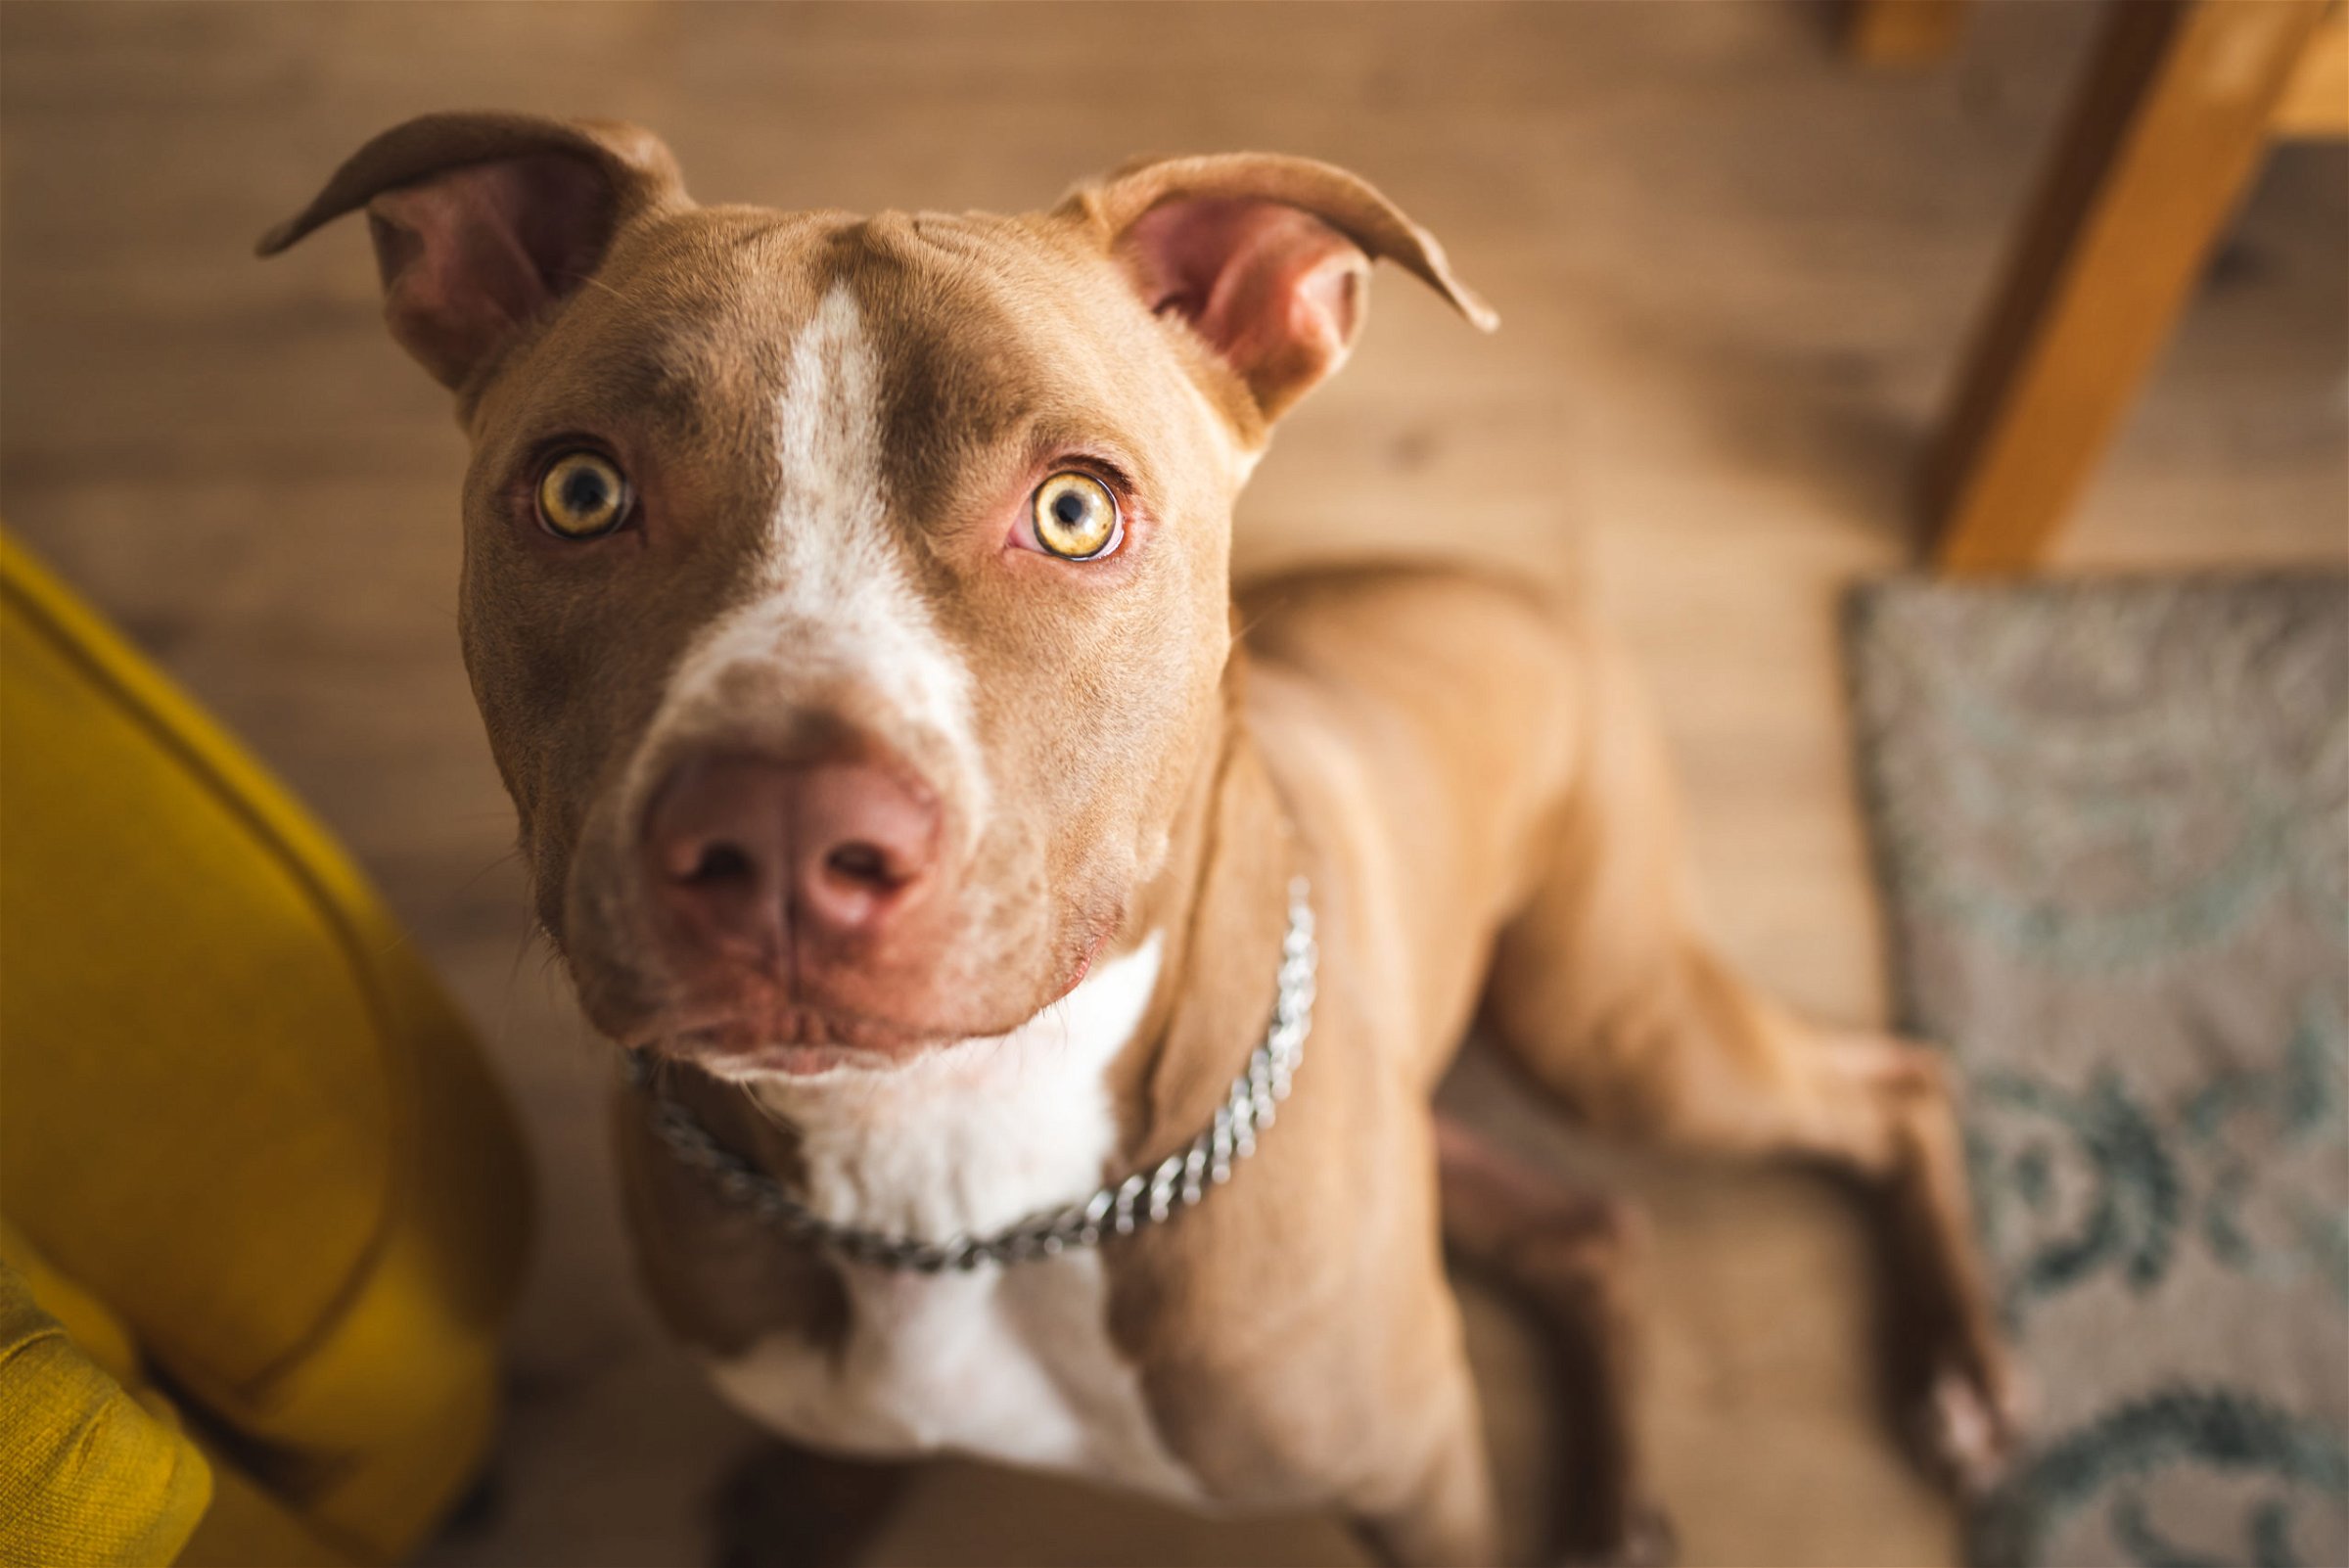 Dog bites in apartment building complexes can be tricky cases due to breed and size restrictions that may limit insurance liability. Call our South Carolina dog bite attorneys if you were severely injured.